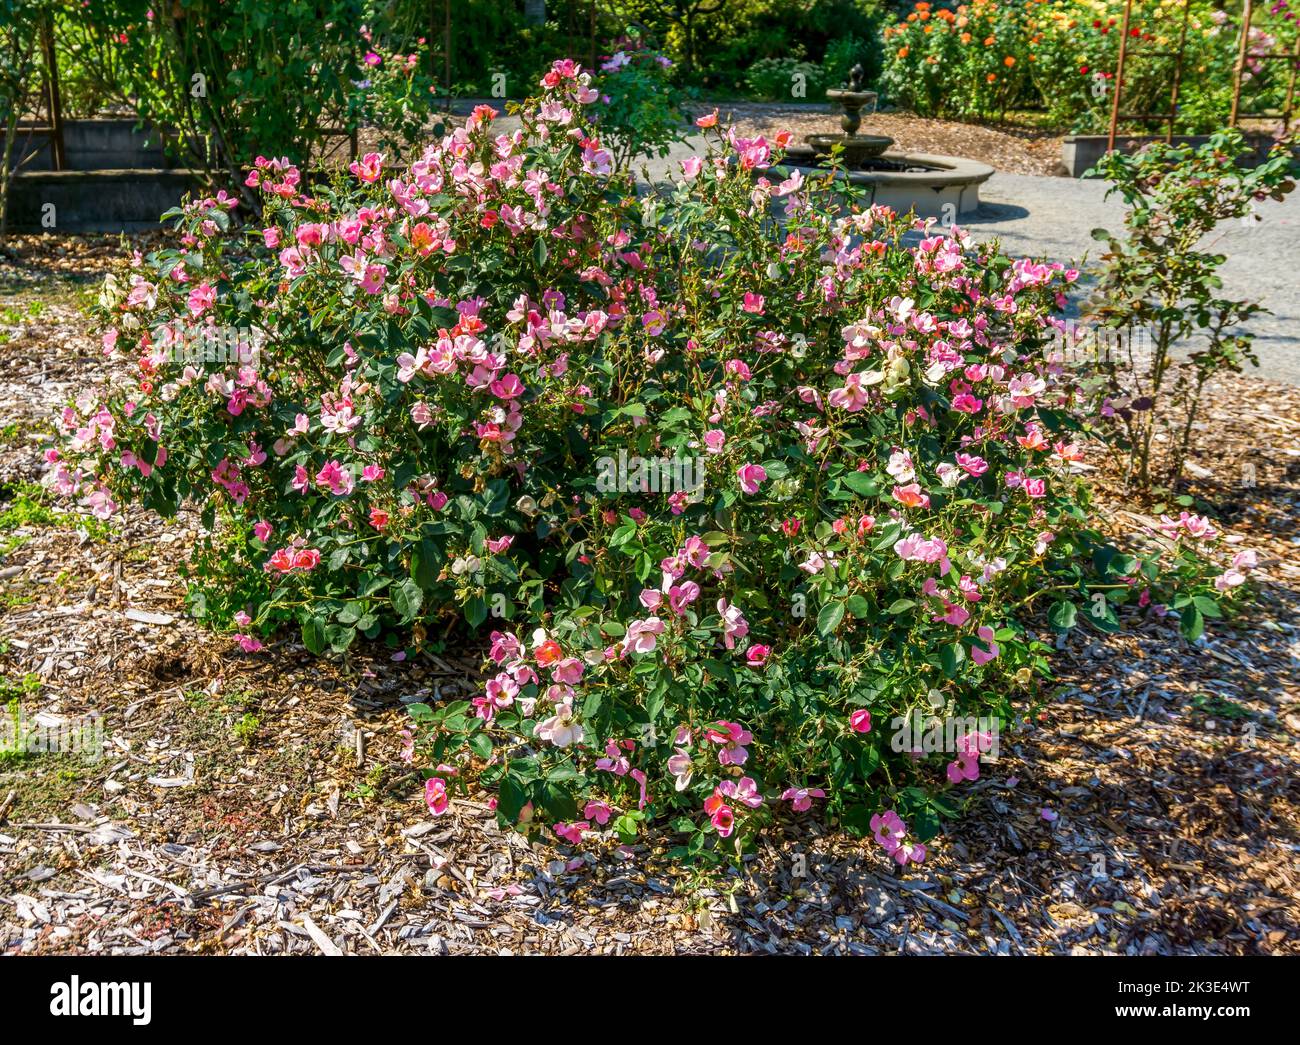 Large bush with pink blossoms at a garden in Seatc, Washington. Stock Photo